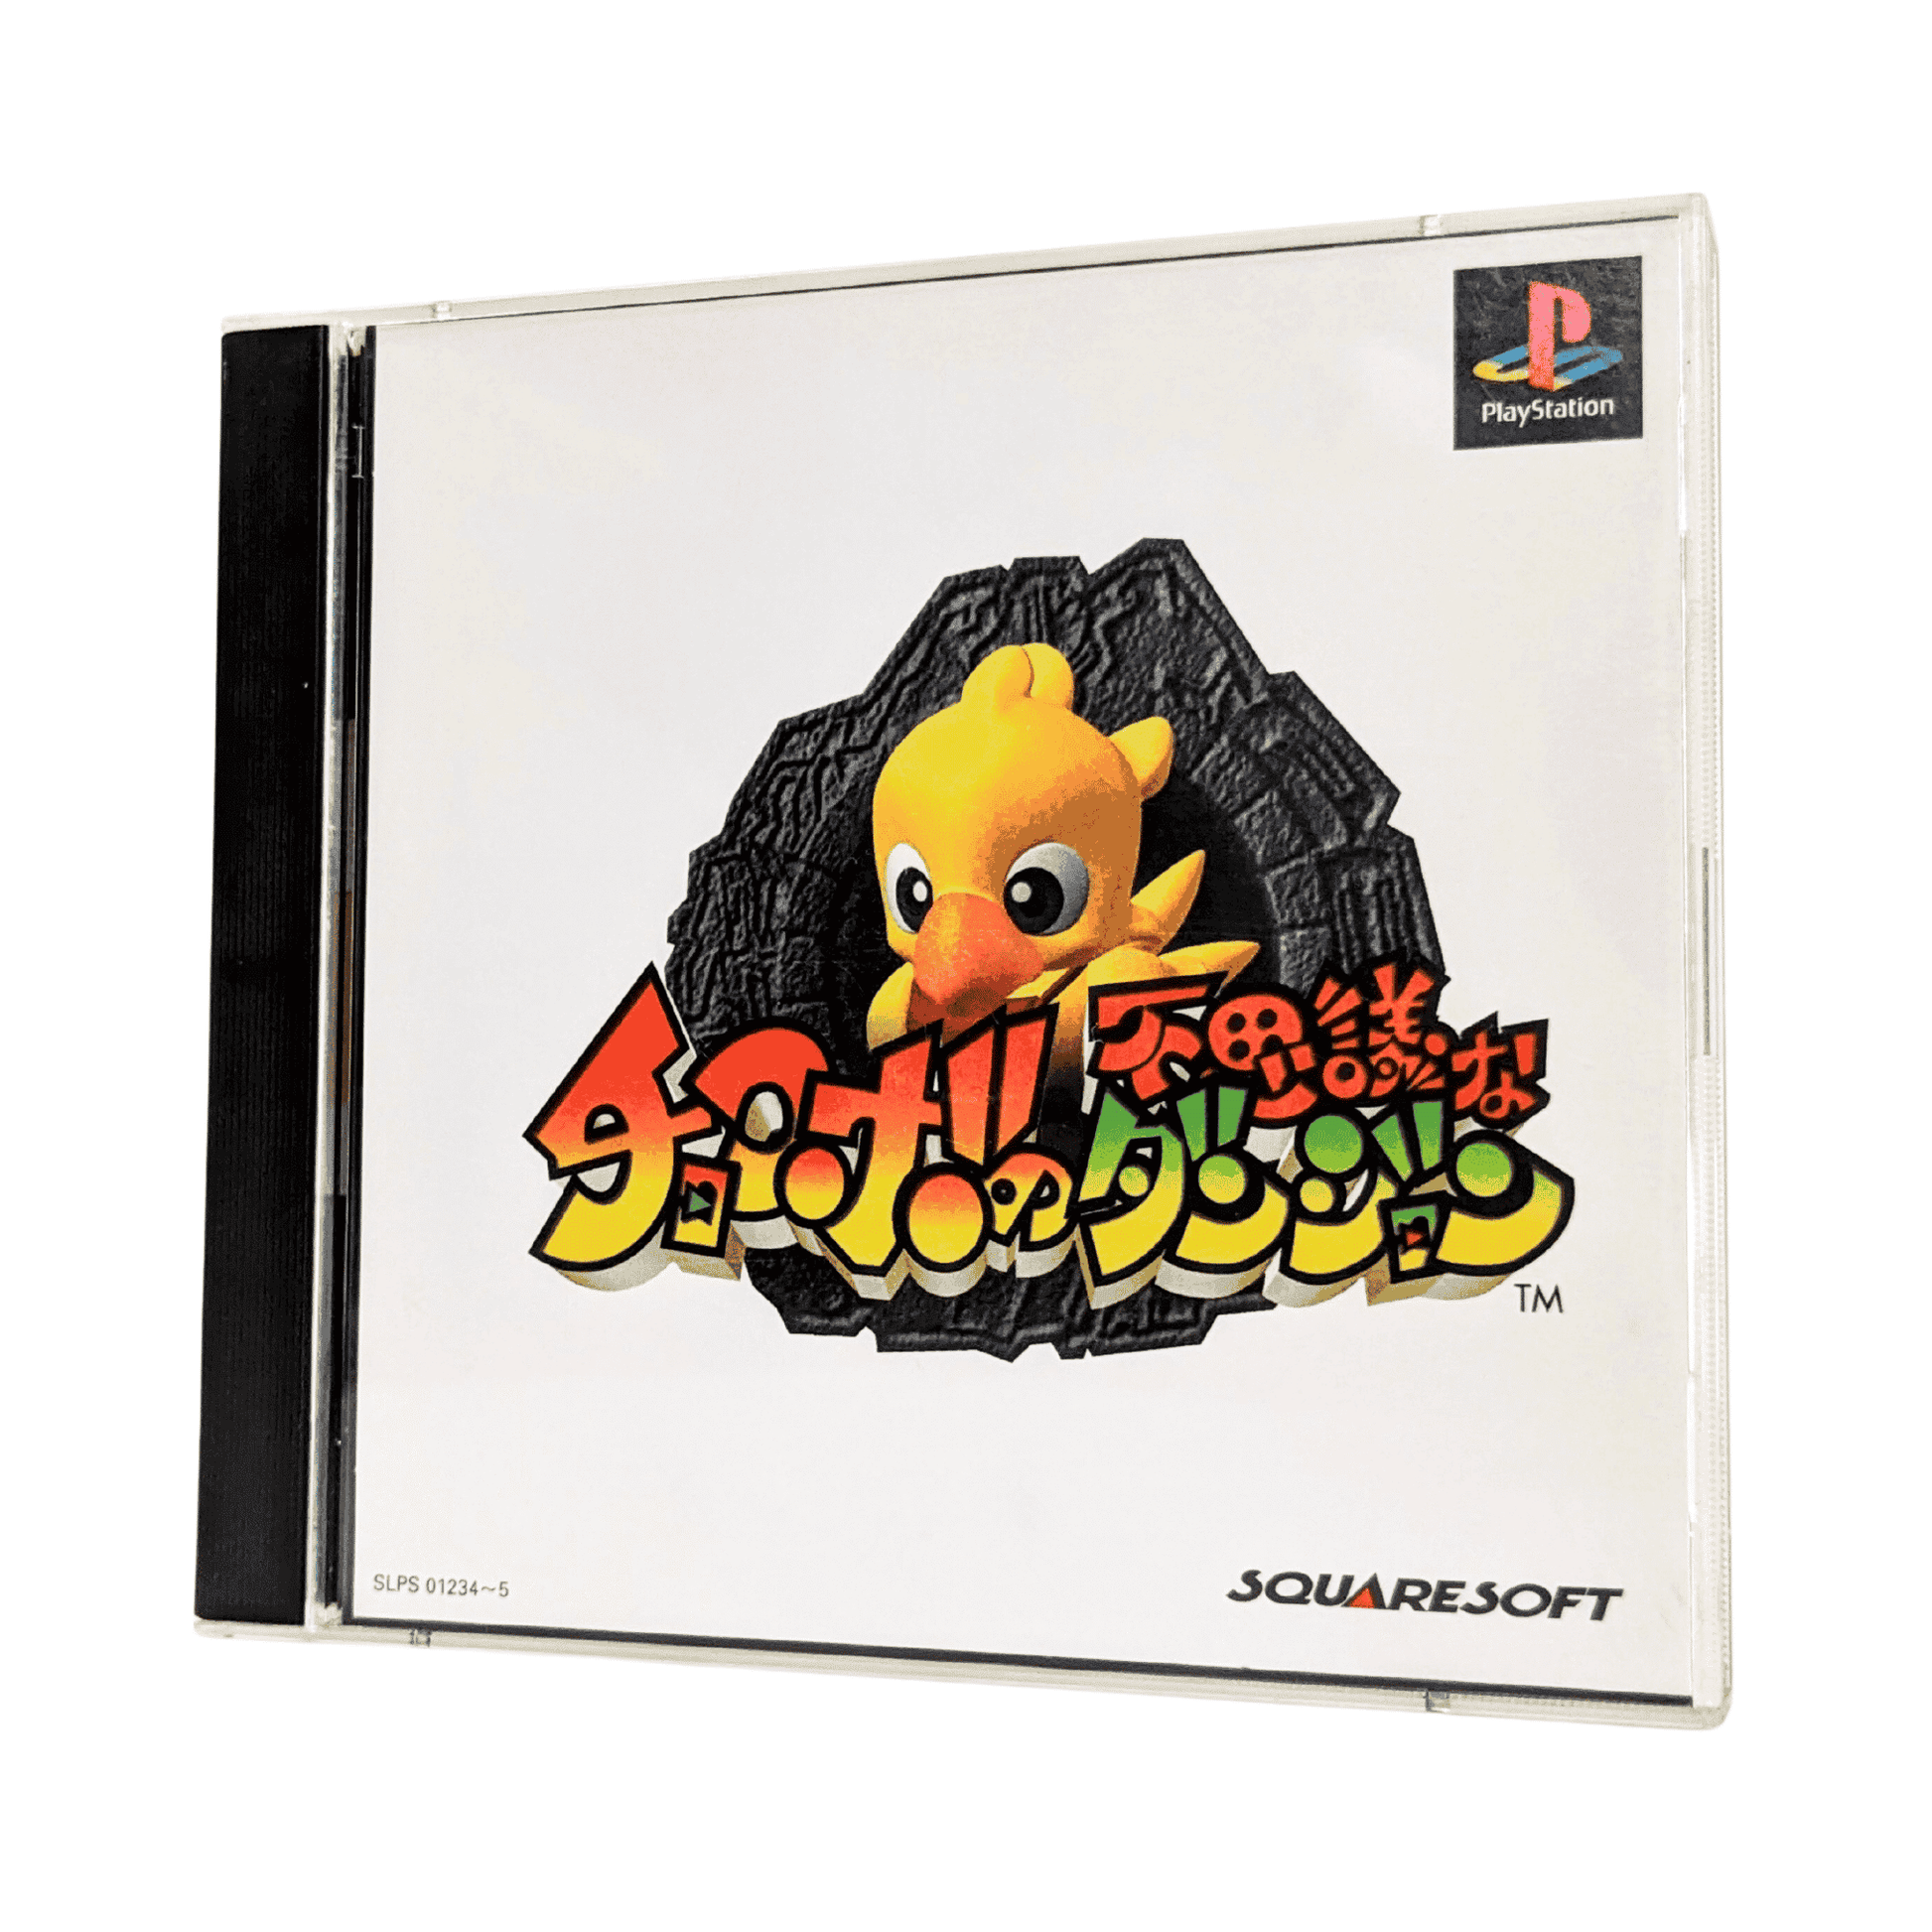 Final Fantasy Fables: Chocobo's Dungeon | PlayStation ChitoroShop